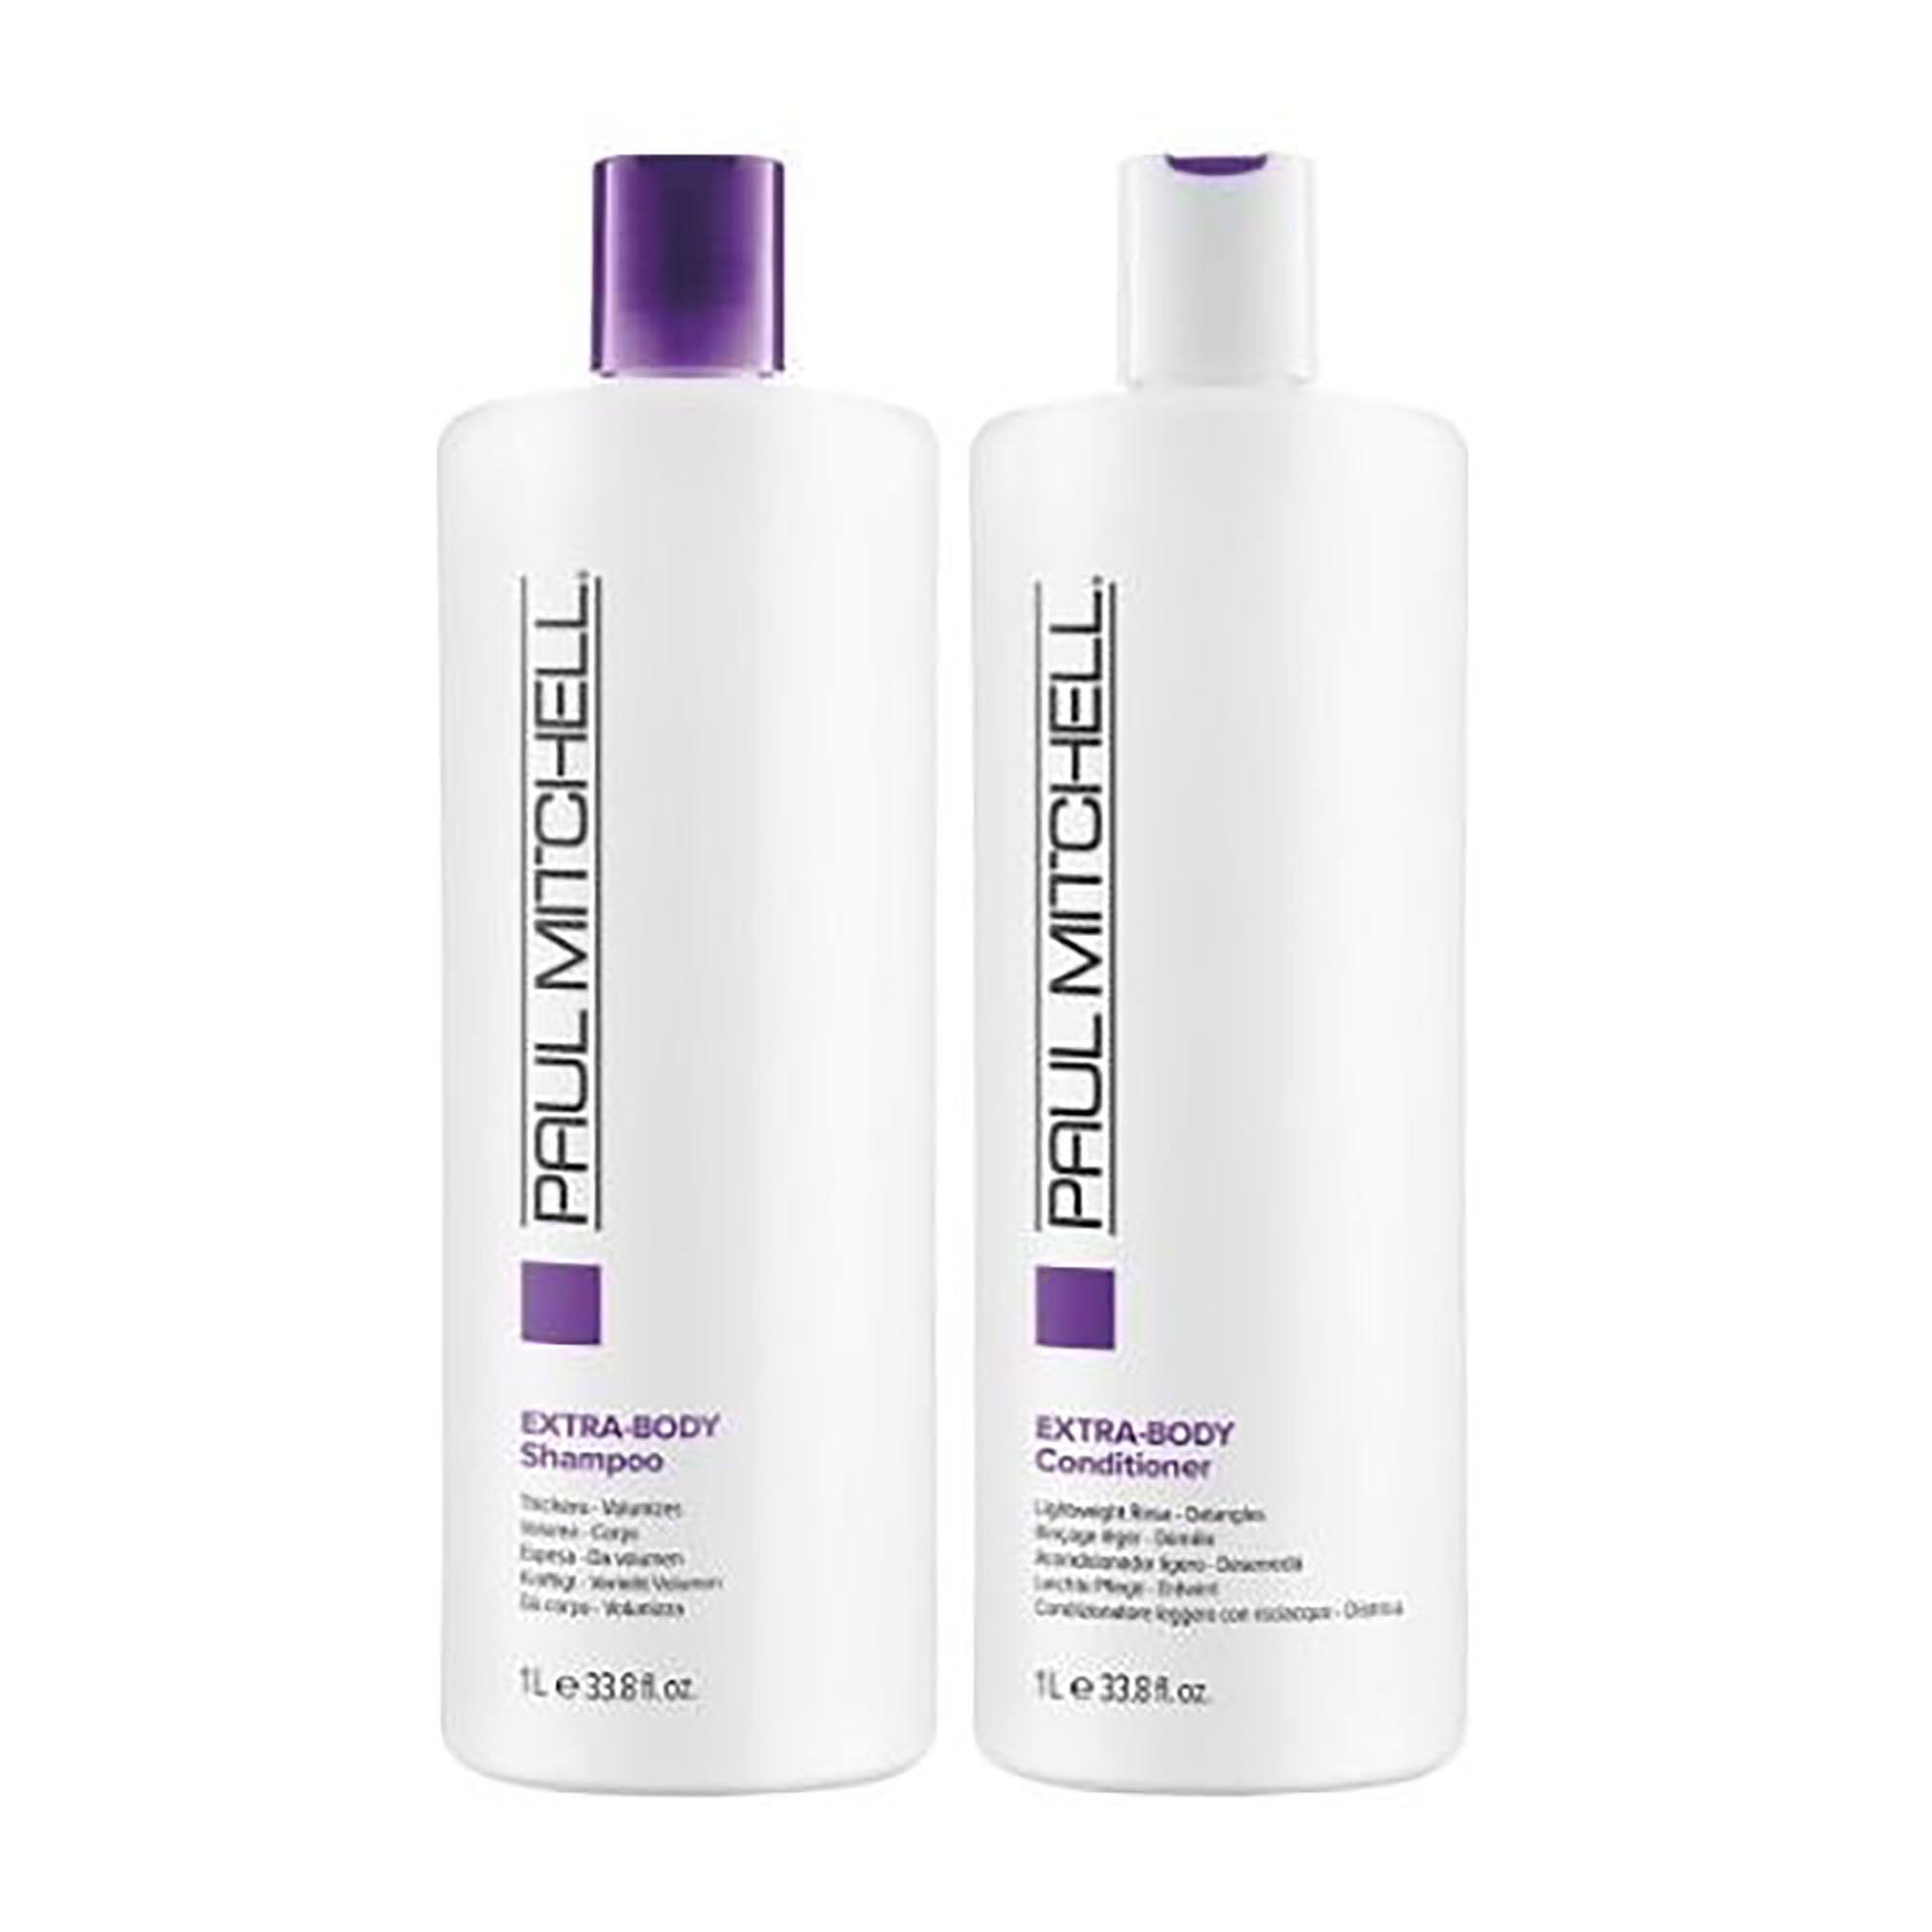 Paul Mitchell Extra-Body Daily Shampoo & Conditioner Liter Duo ($59 Value) / LITER